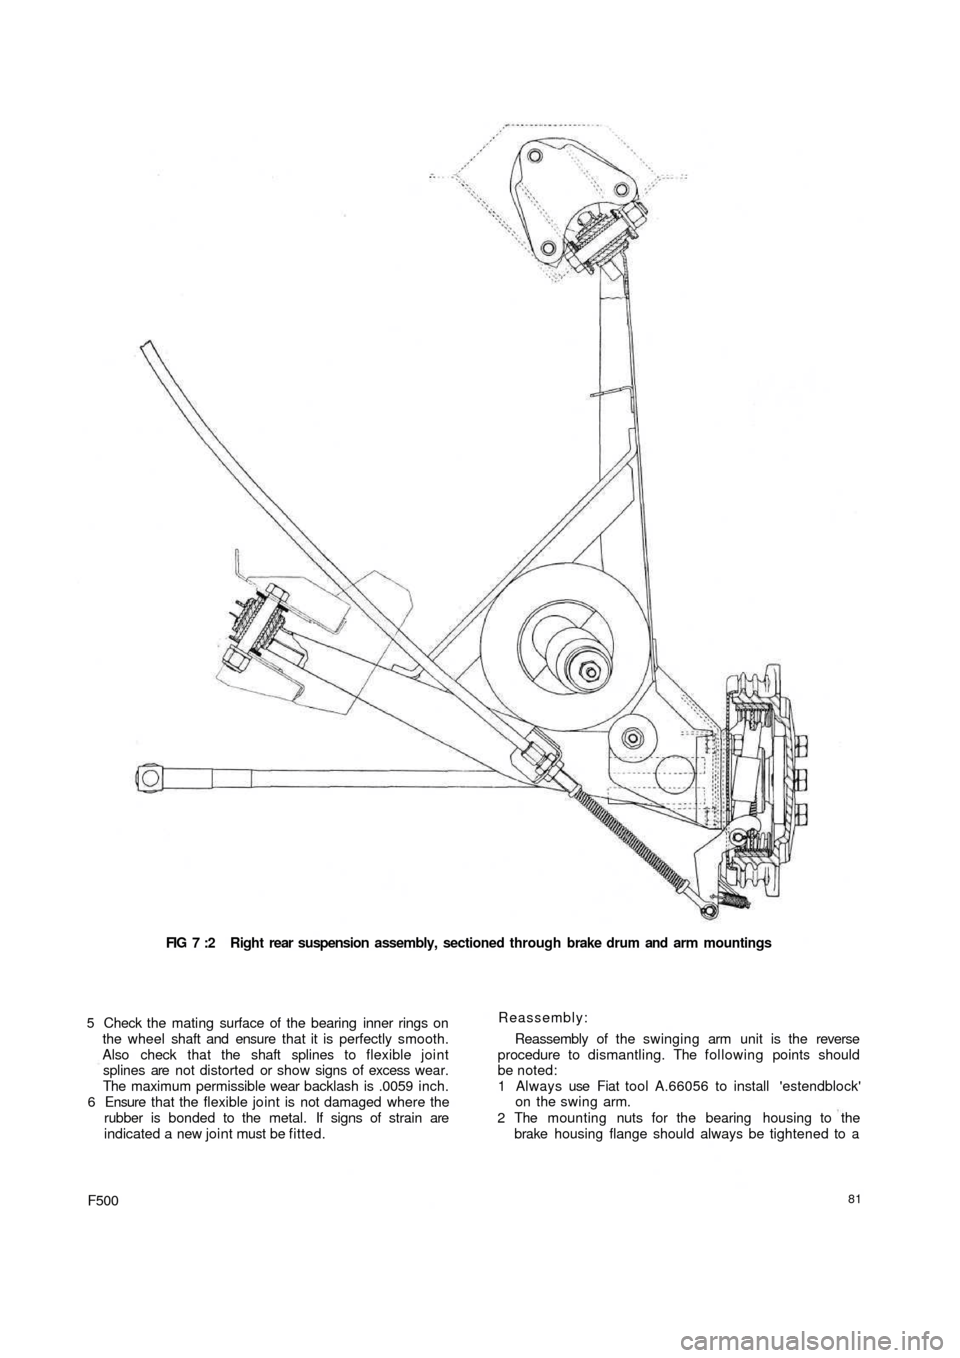 FIAT 500 1957 1.G Manual PDF FIG 7 :2  Right rear suspension  assembly, sectioned through brake drum and arm mountings
5 Check the mating surface of the bearing inner rings on
the wheel shaft and ensure that it is perfectly smoot